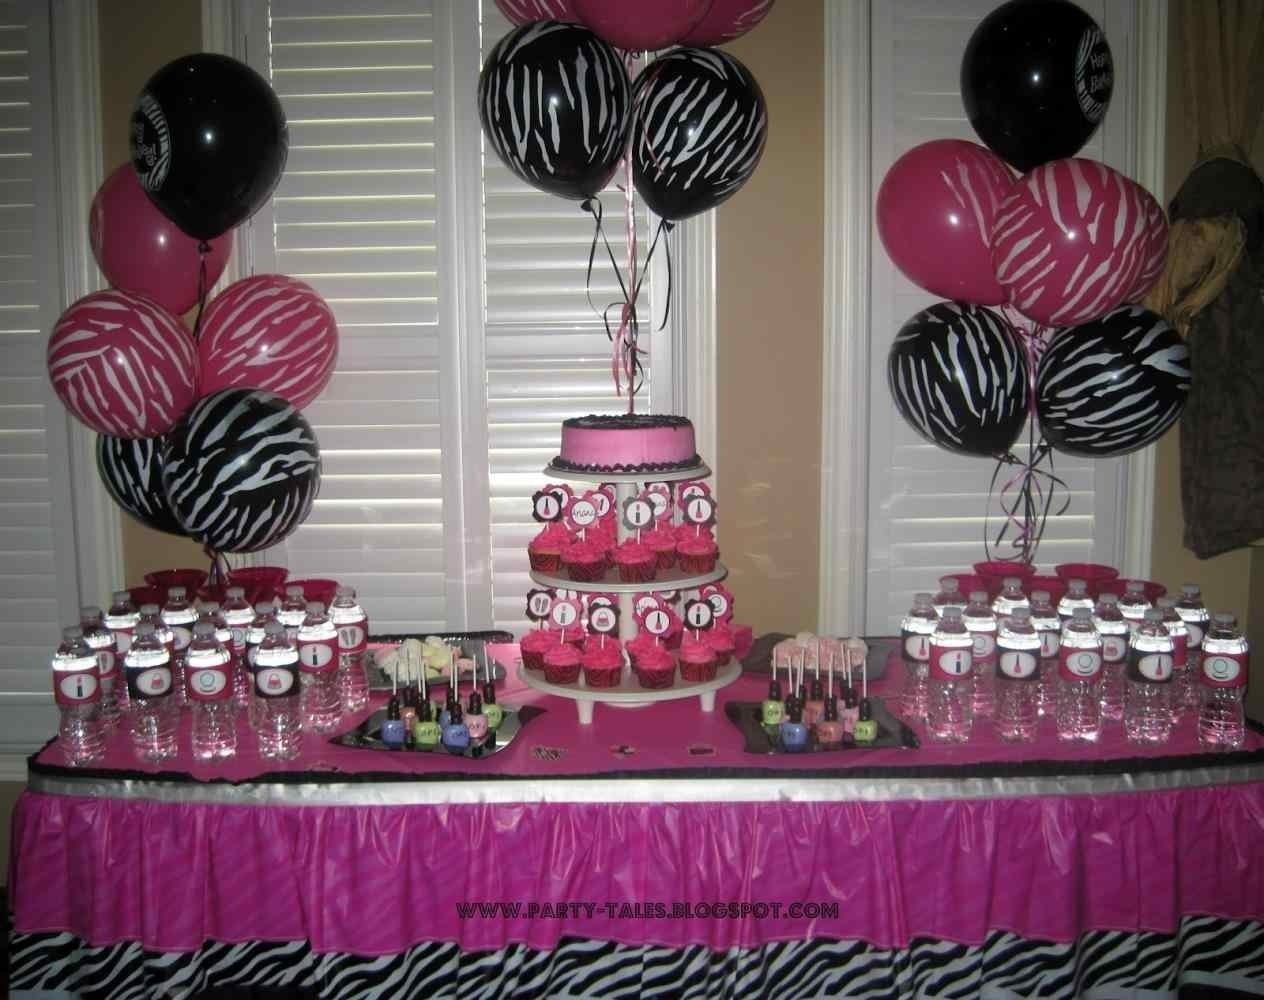 10 Unique 13Th Birthday Party Ideas For Girls st images on pinterest best unique 13th birthday party themes girls 2 2022